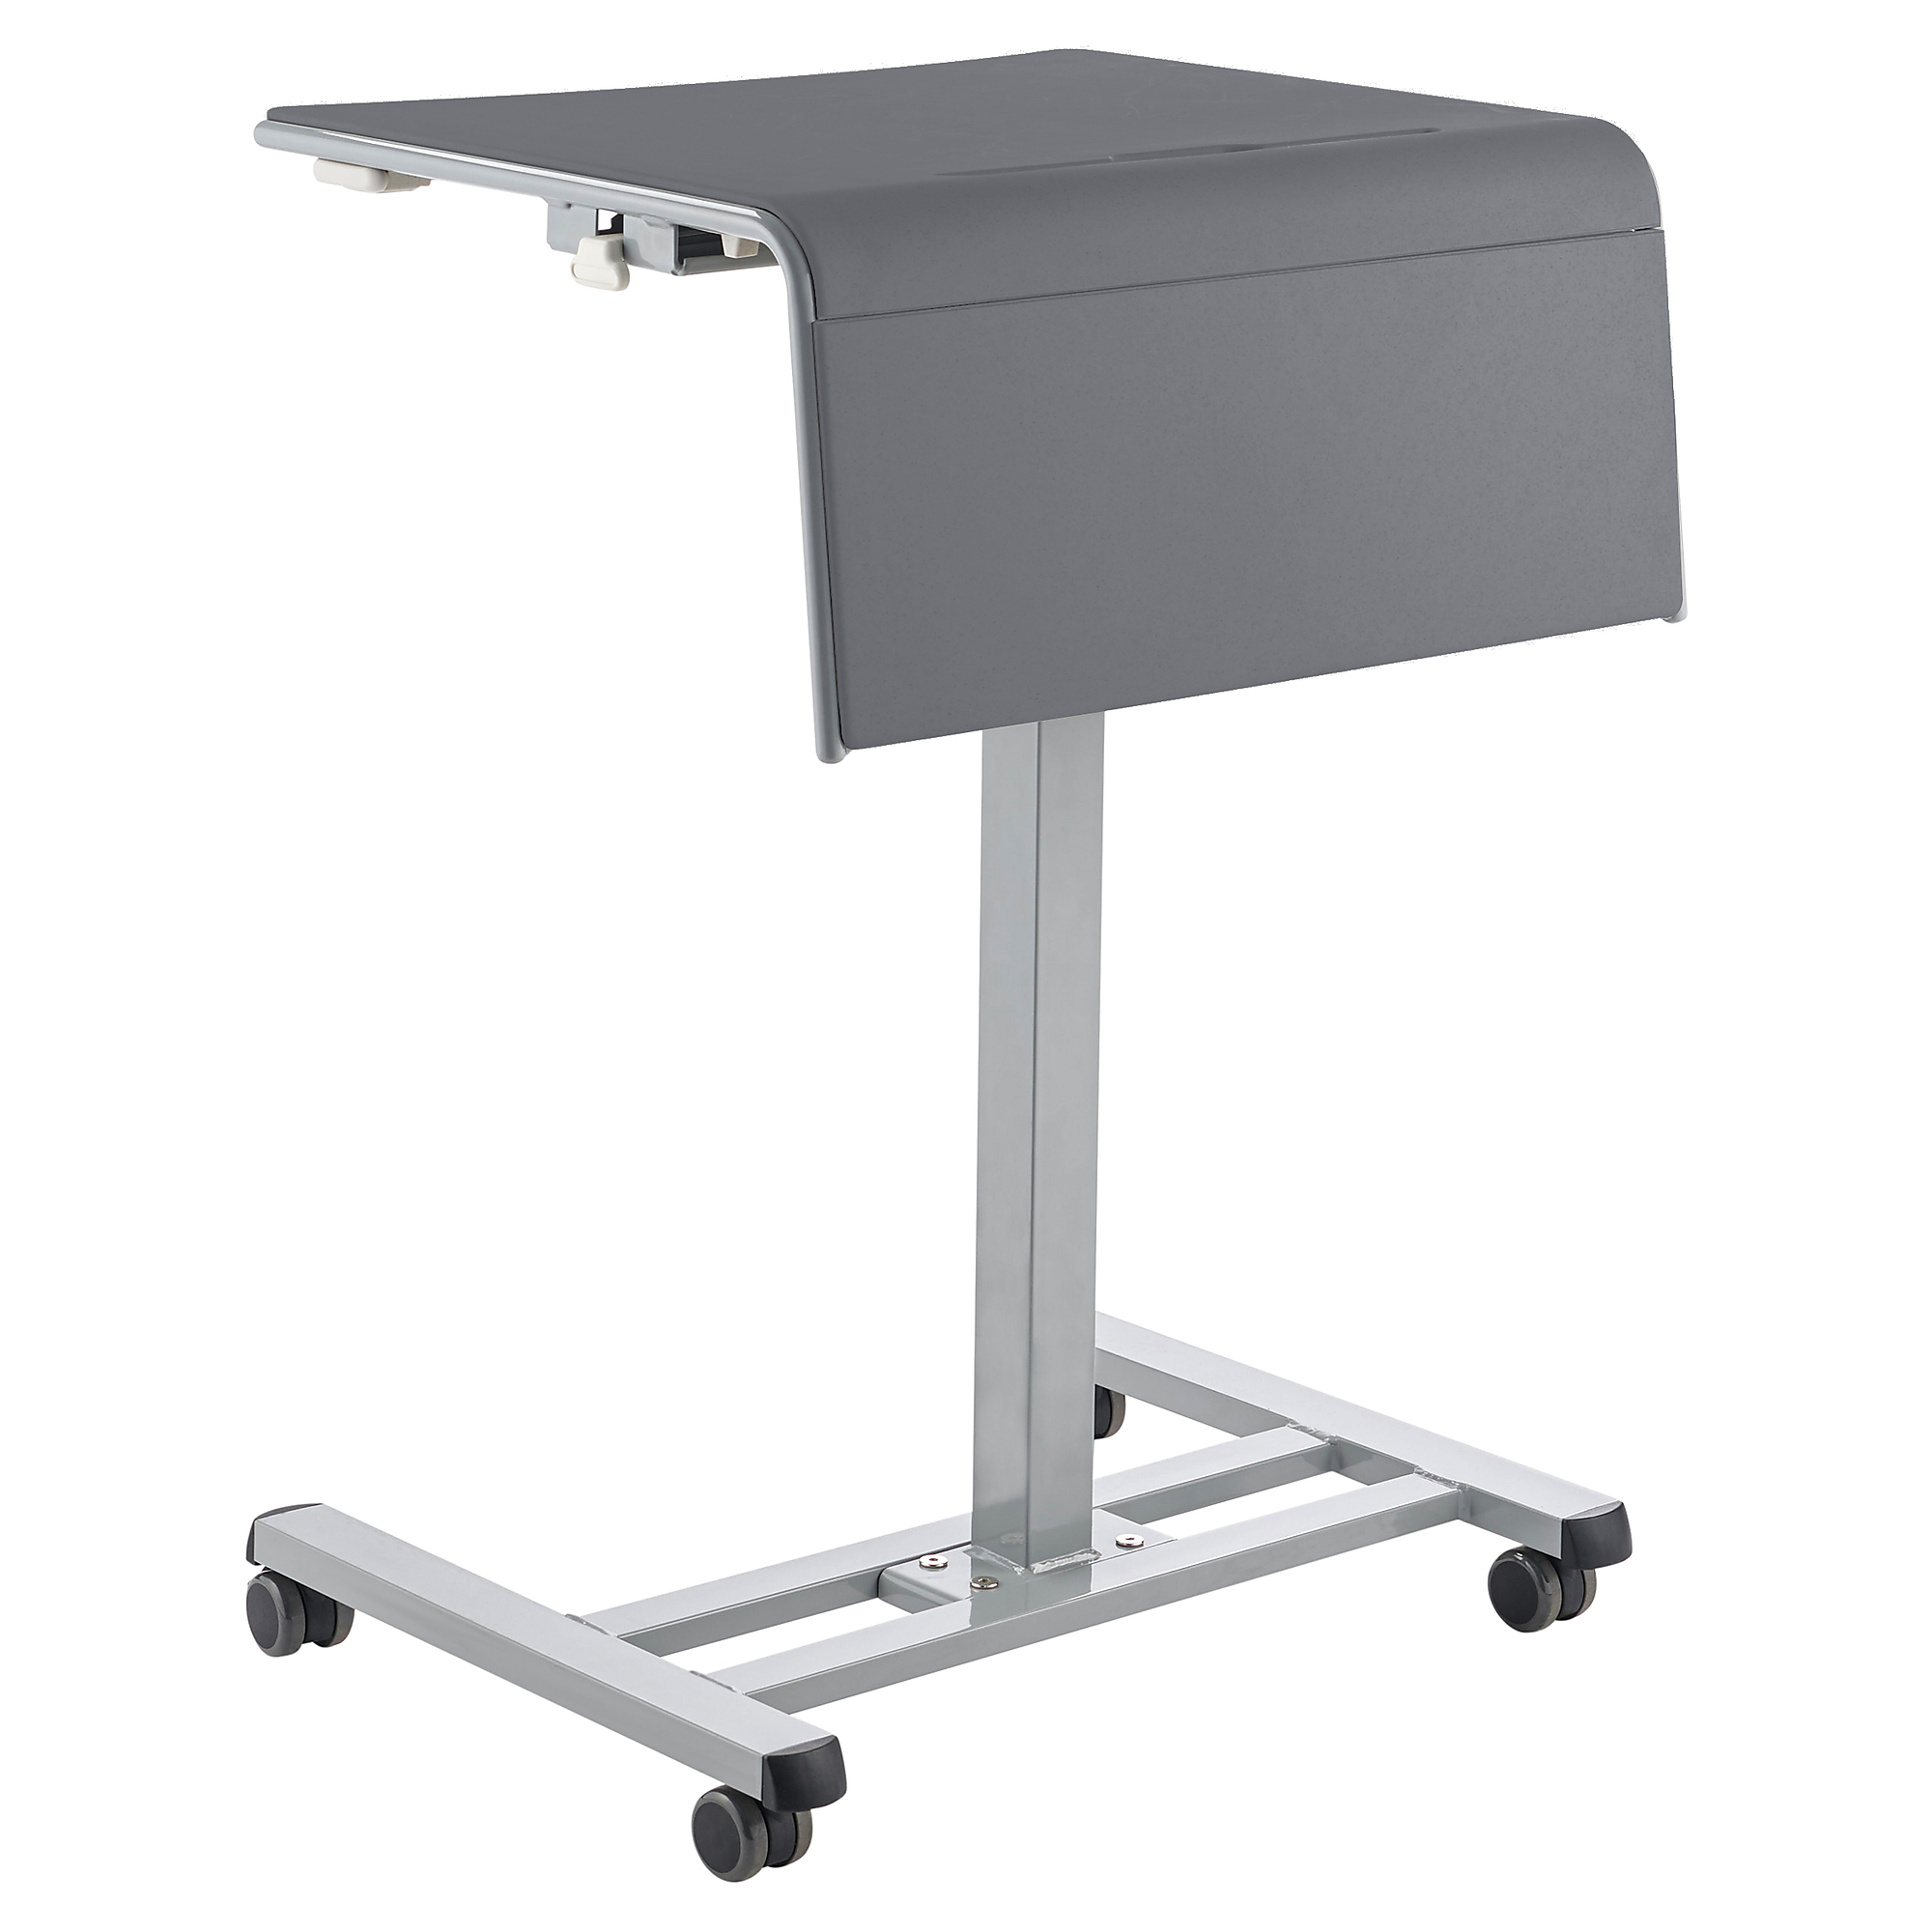 Sit+Stand Desk Pro, Width 23.5 in, Height 41.75 in, Depth 19.5 in, Model - National Public Seating SSDG-20